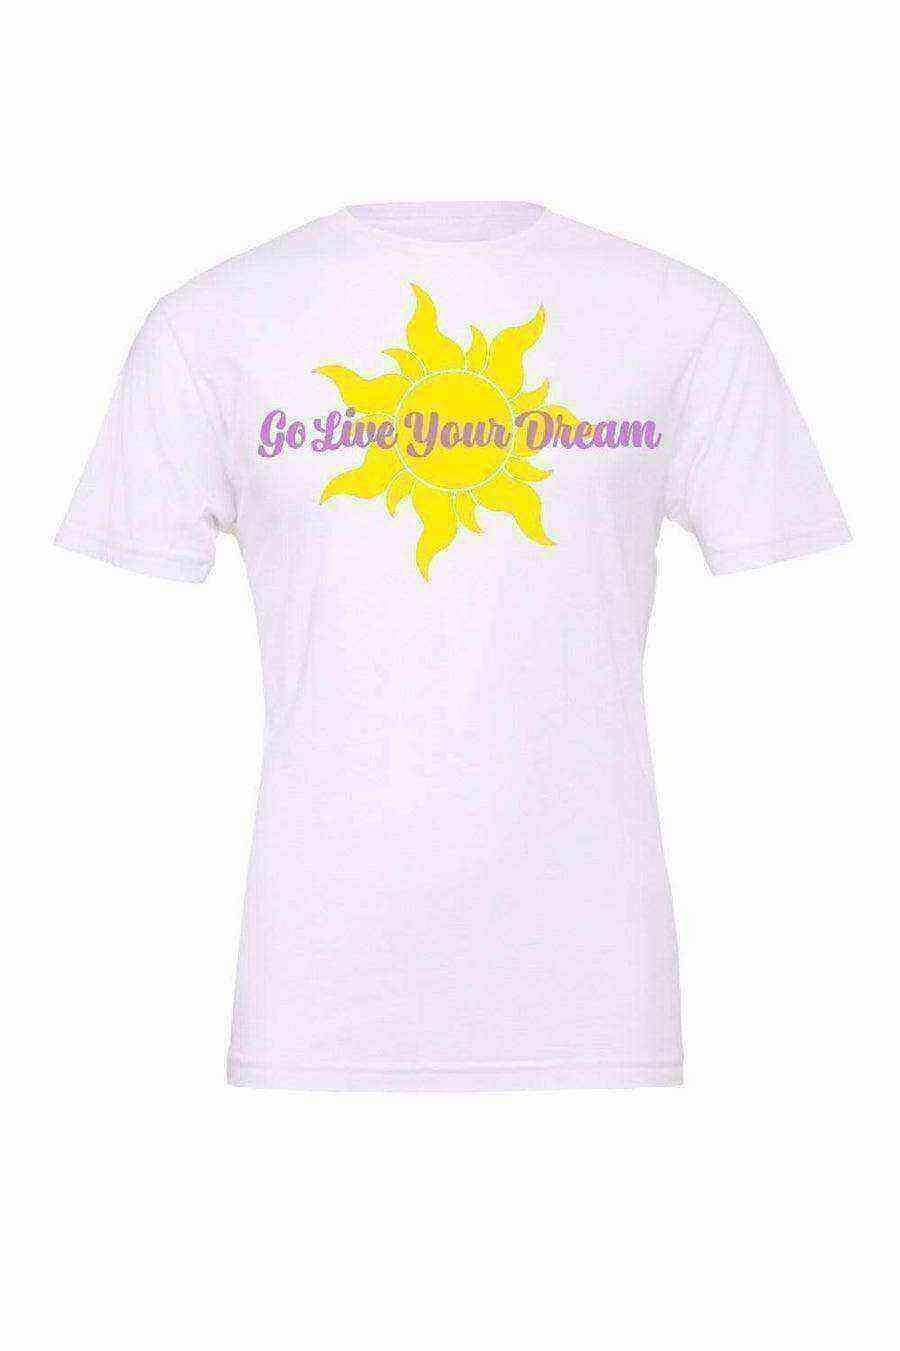 Womens | Go Live Your Dream - Dylan's Tees